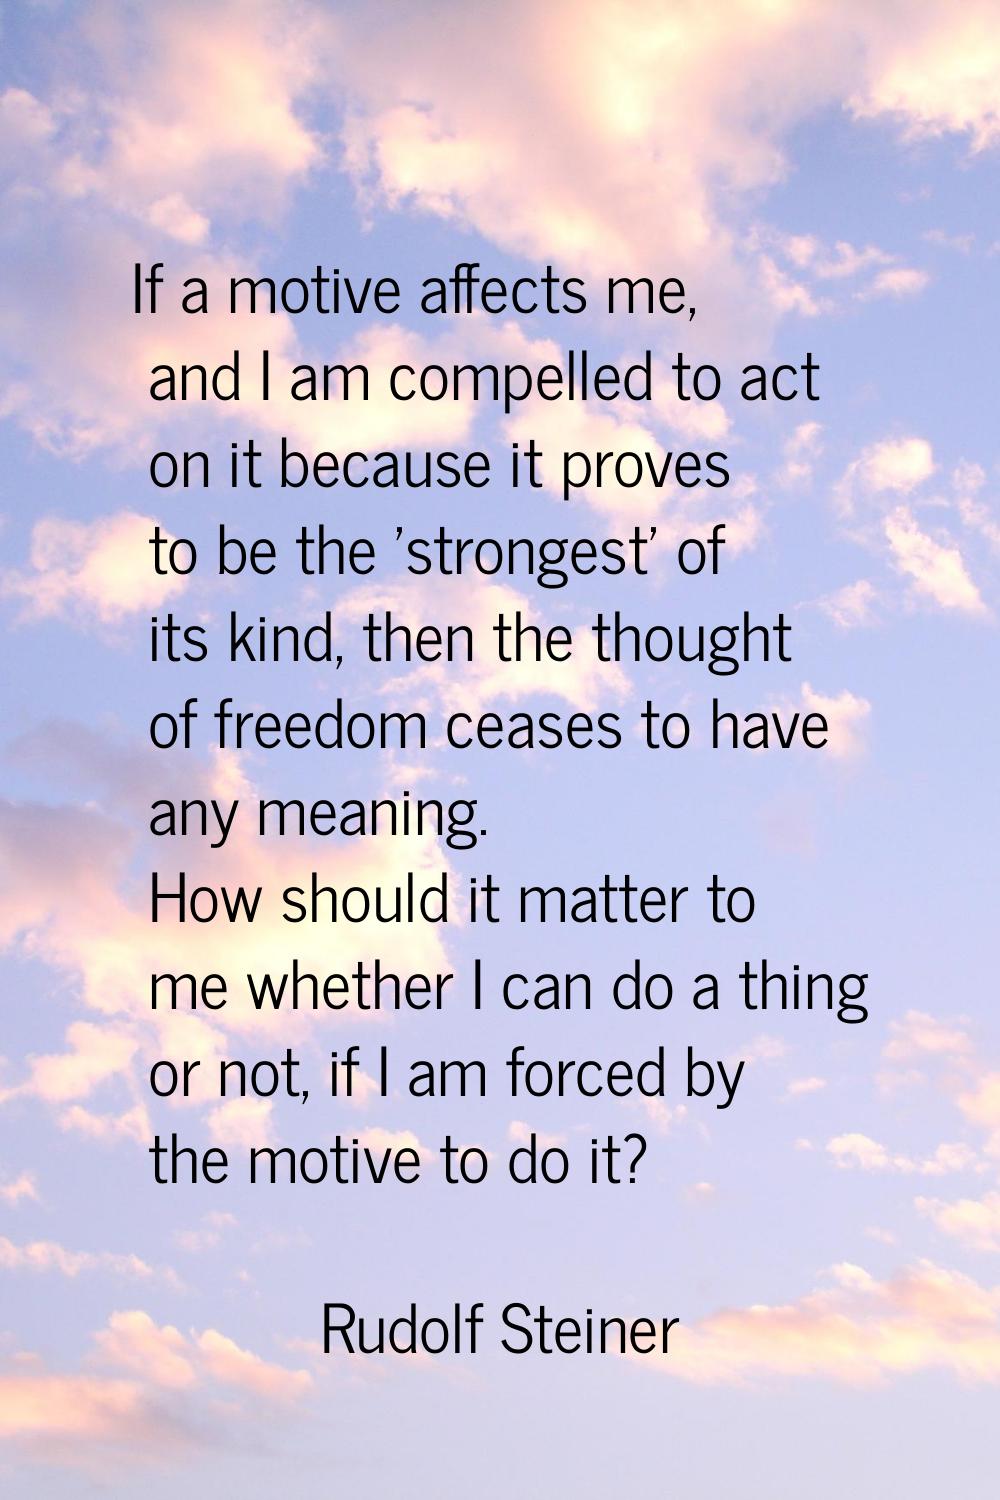 If a motive affects me, and I am compelled to act on it because it proves to be the 'strongest' of 